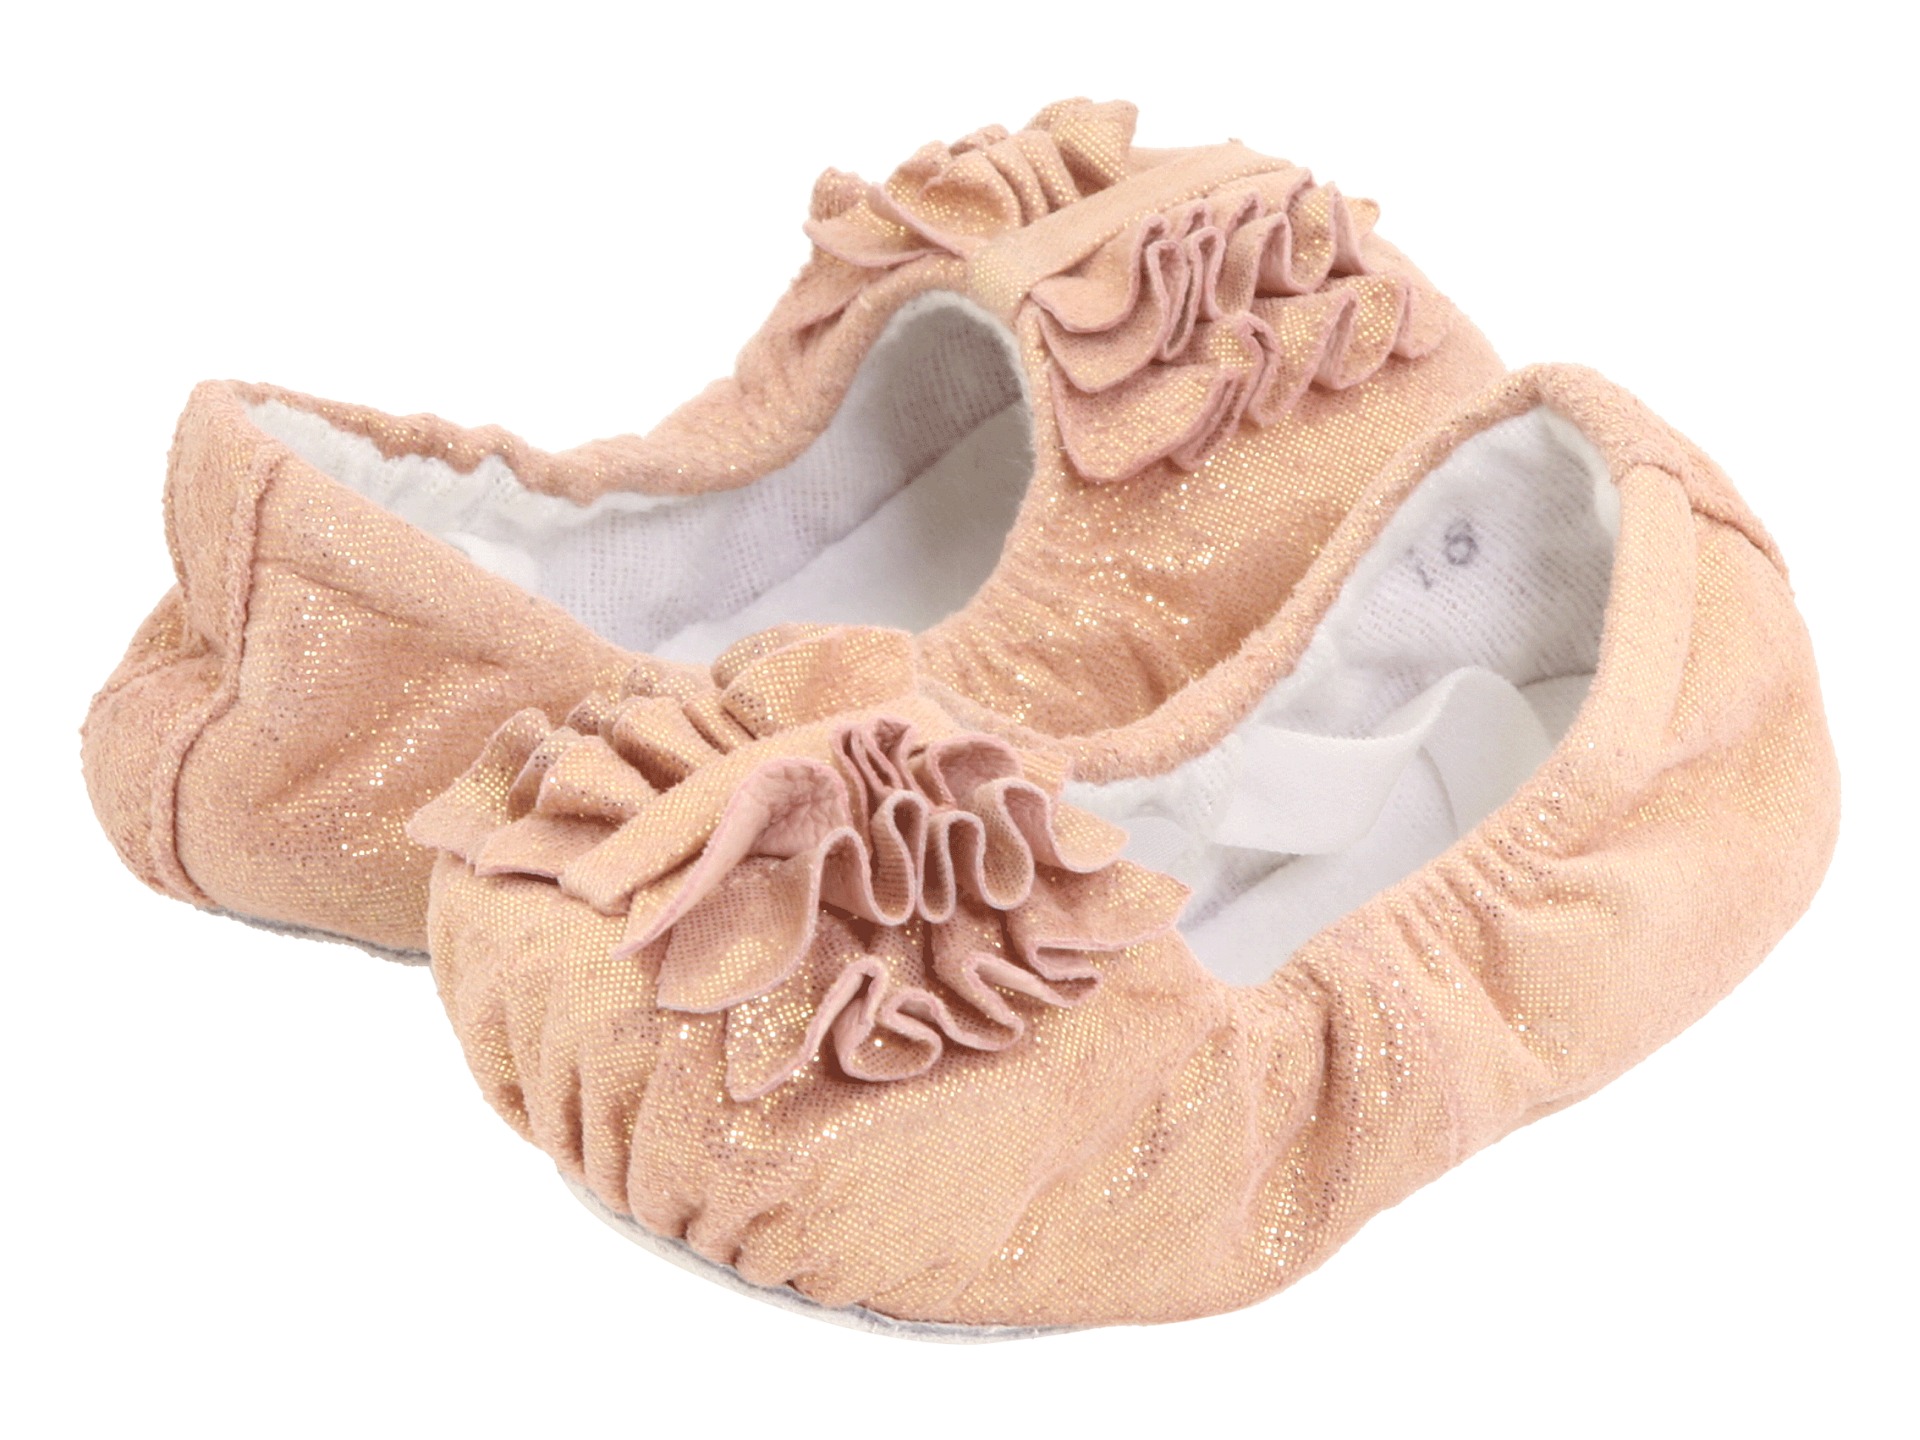 Bloch Kids Baby Ruffle (Infant/Toddler) $34.99 $38.00 SALE